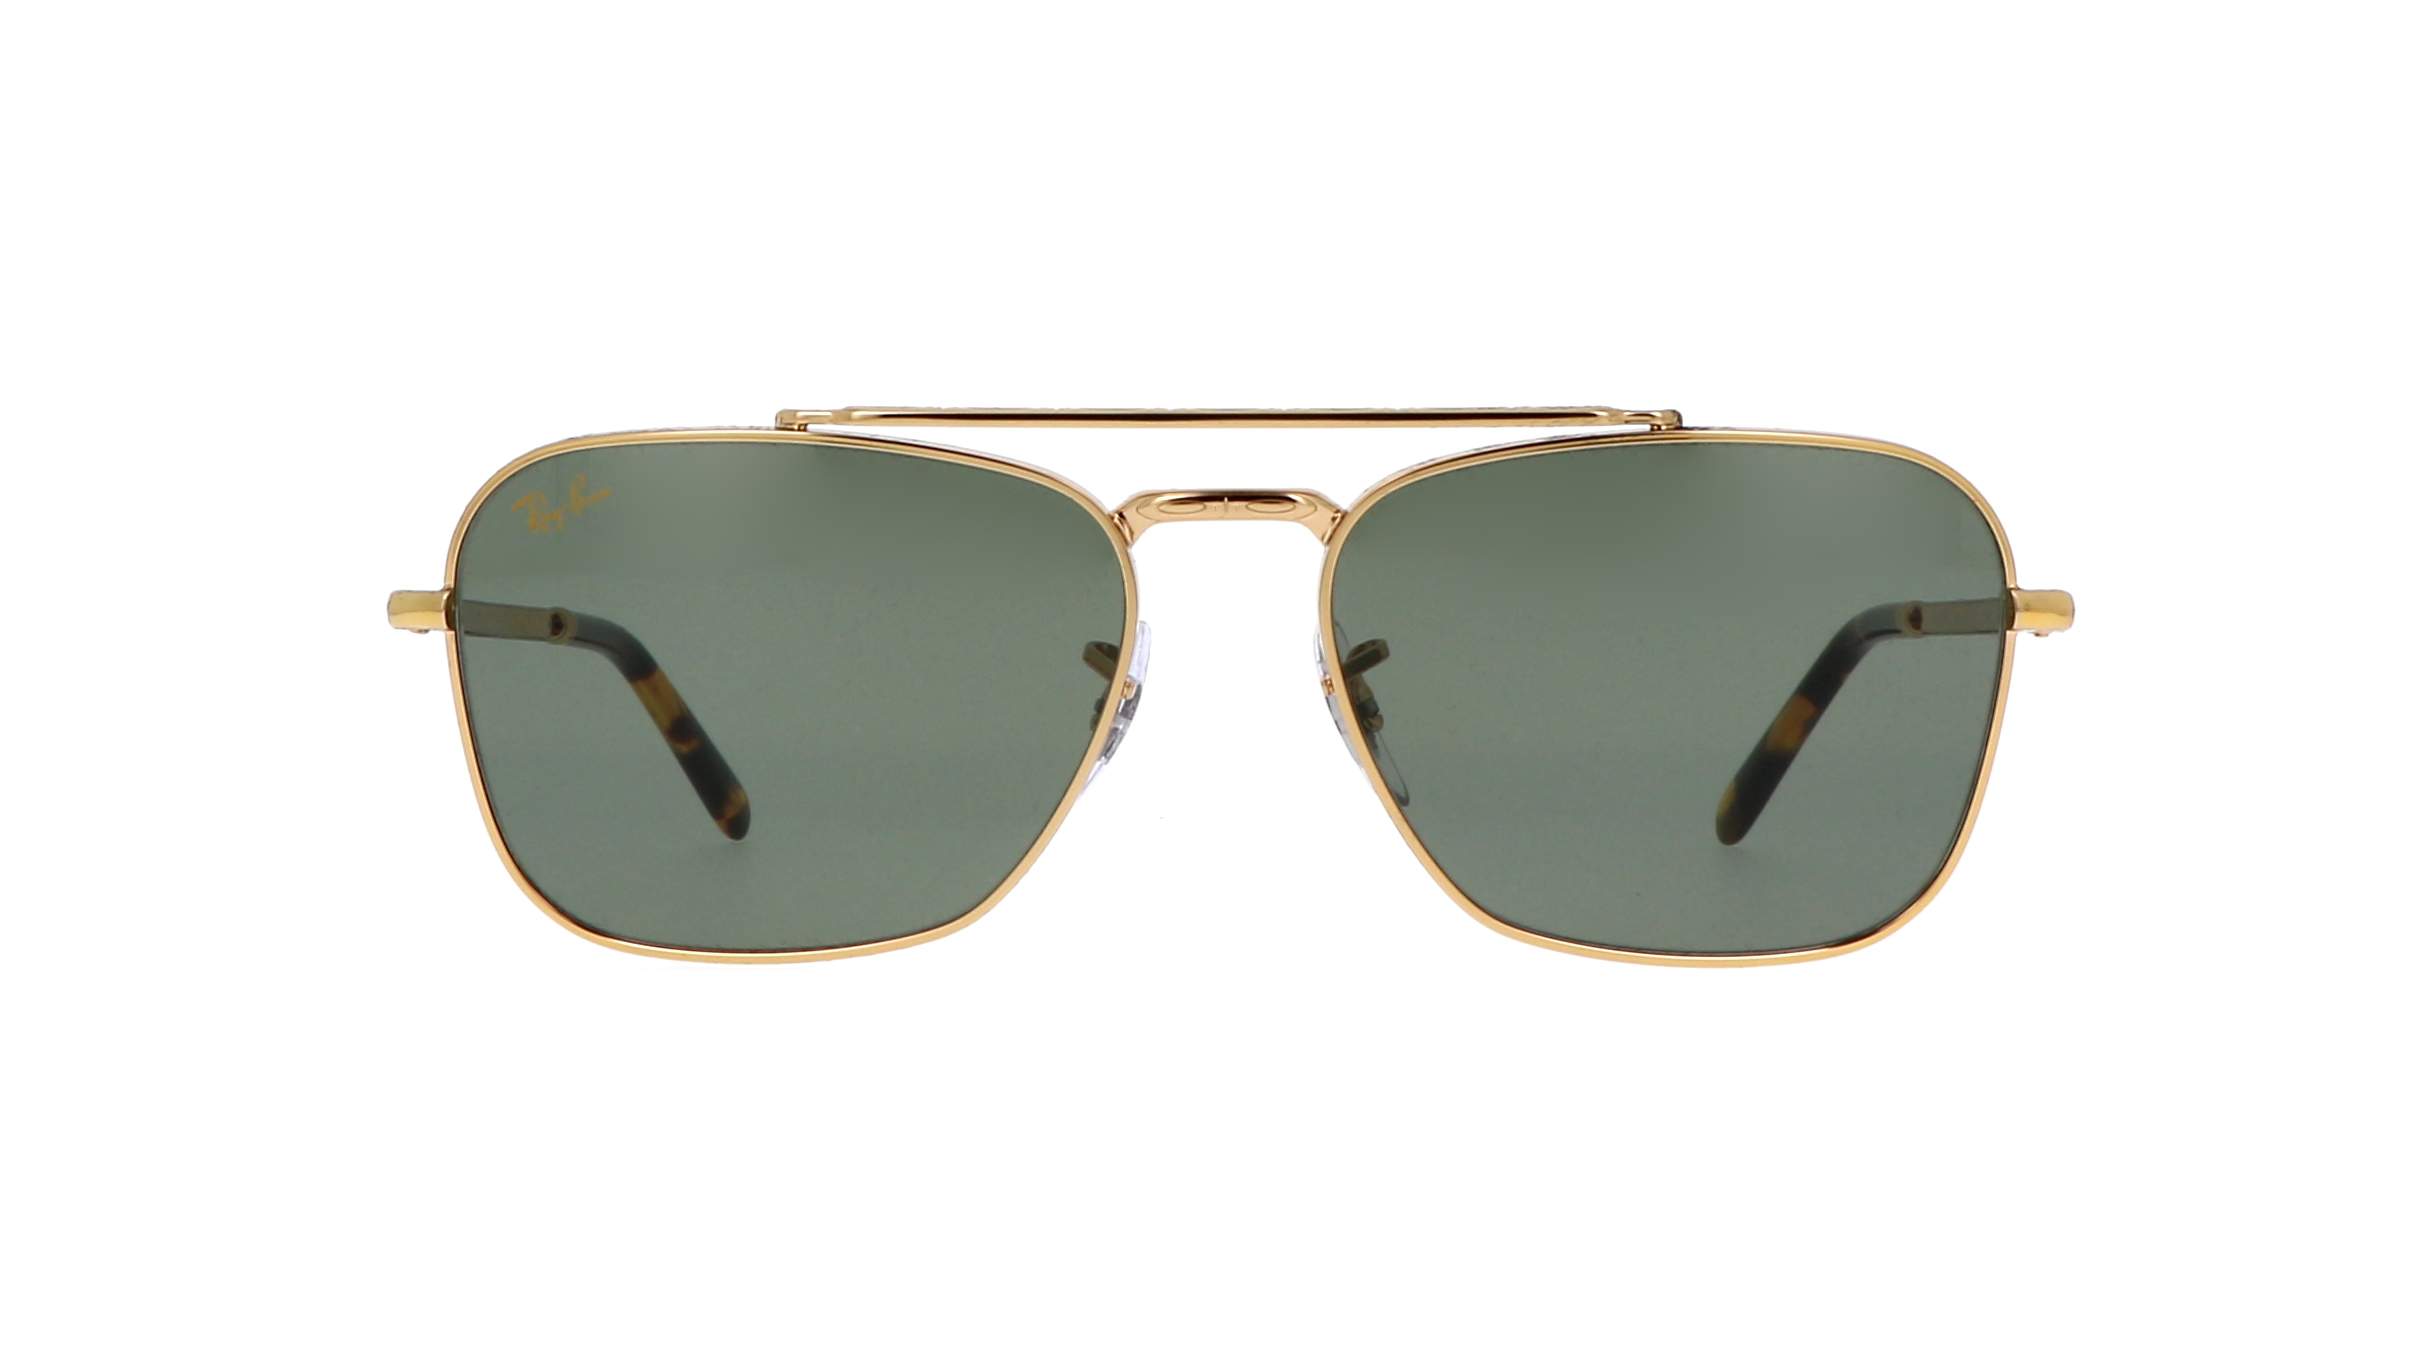 Sunglasses Ray-ban New caravan RB3636 9196/31 55-15 Legend gold in ...